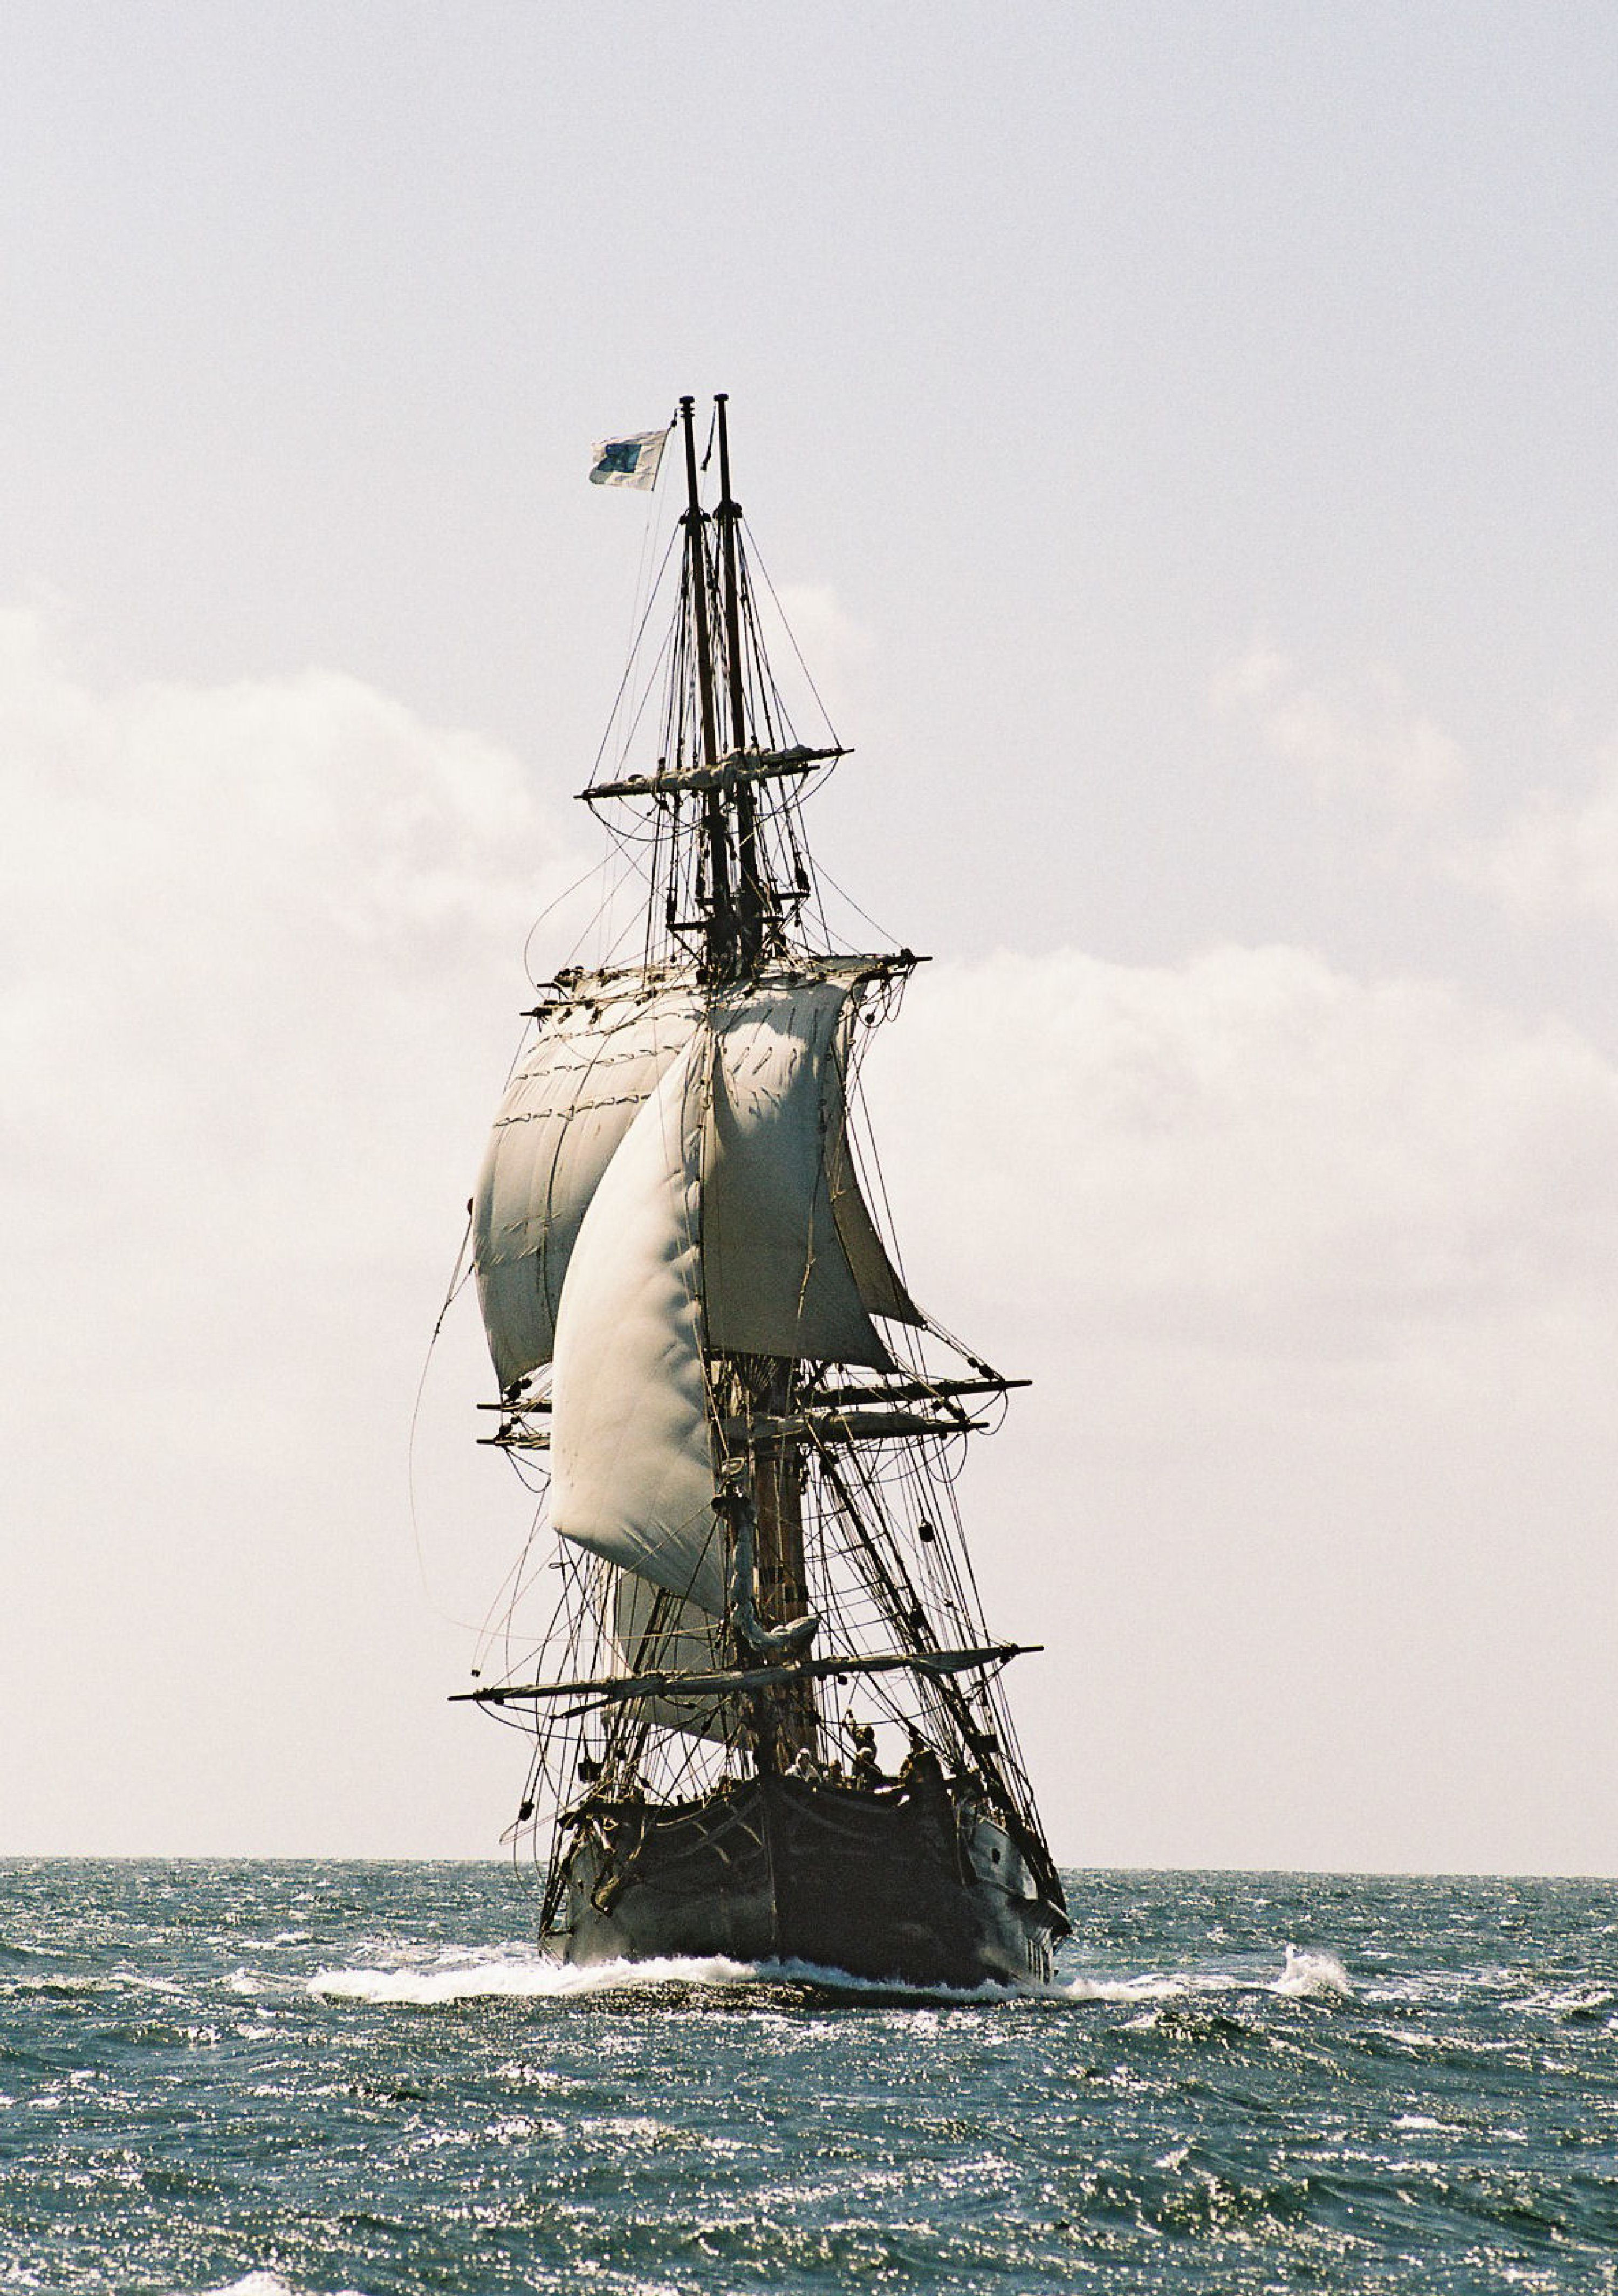 The Phoenix Tall Ship presented by Square Sail